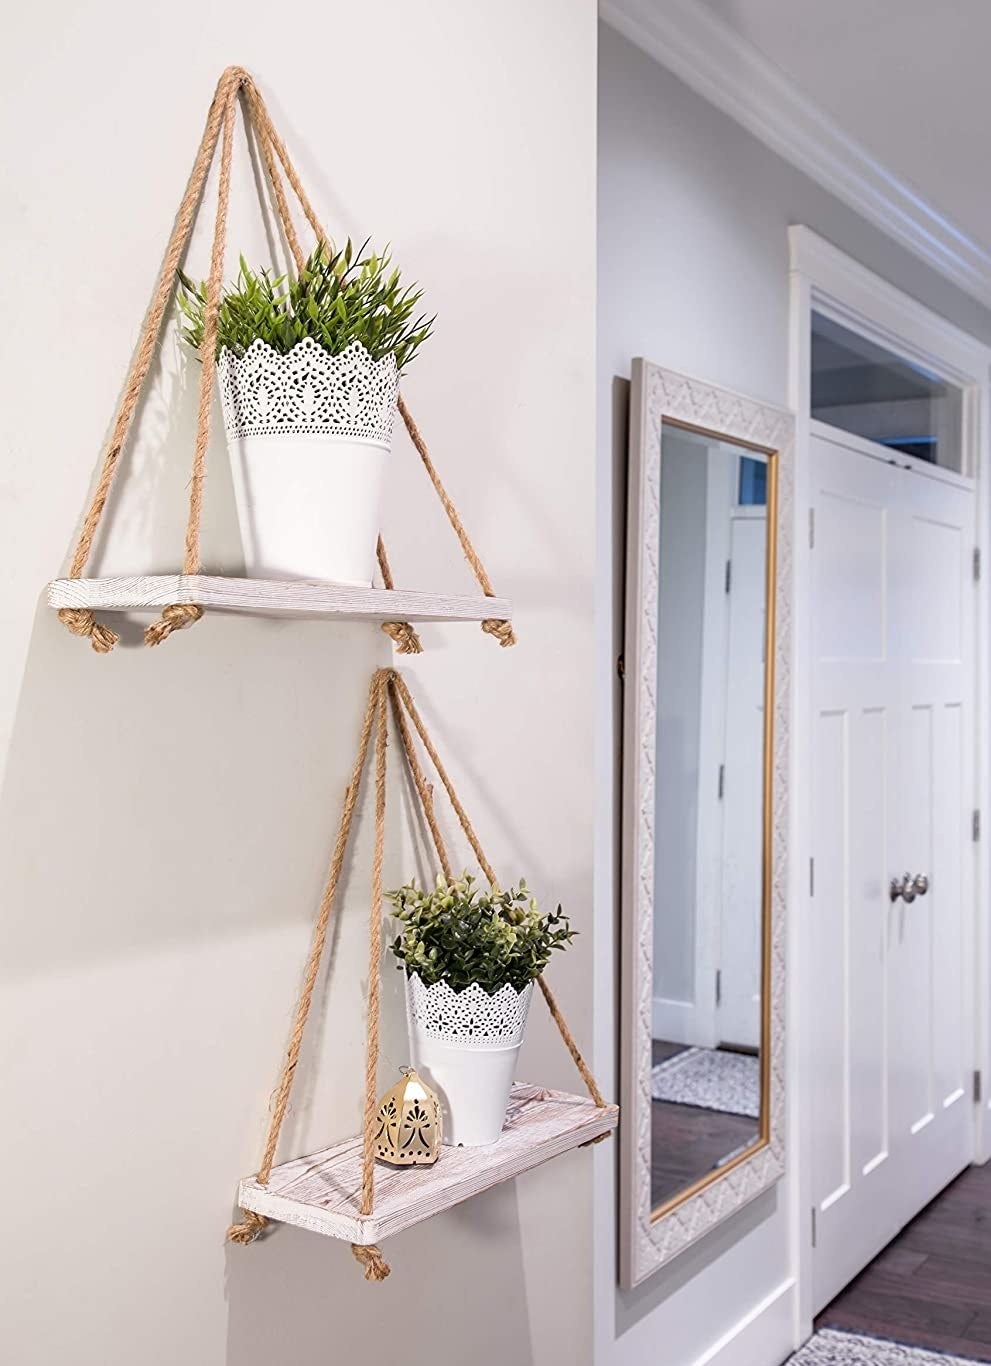 A pair of rustic wall shelves hung with sisal rope in an entryway